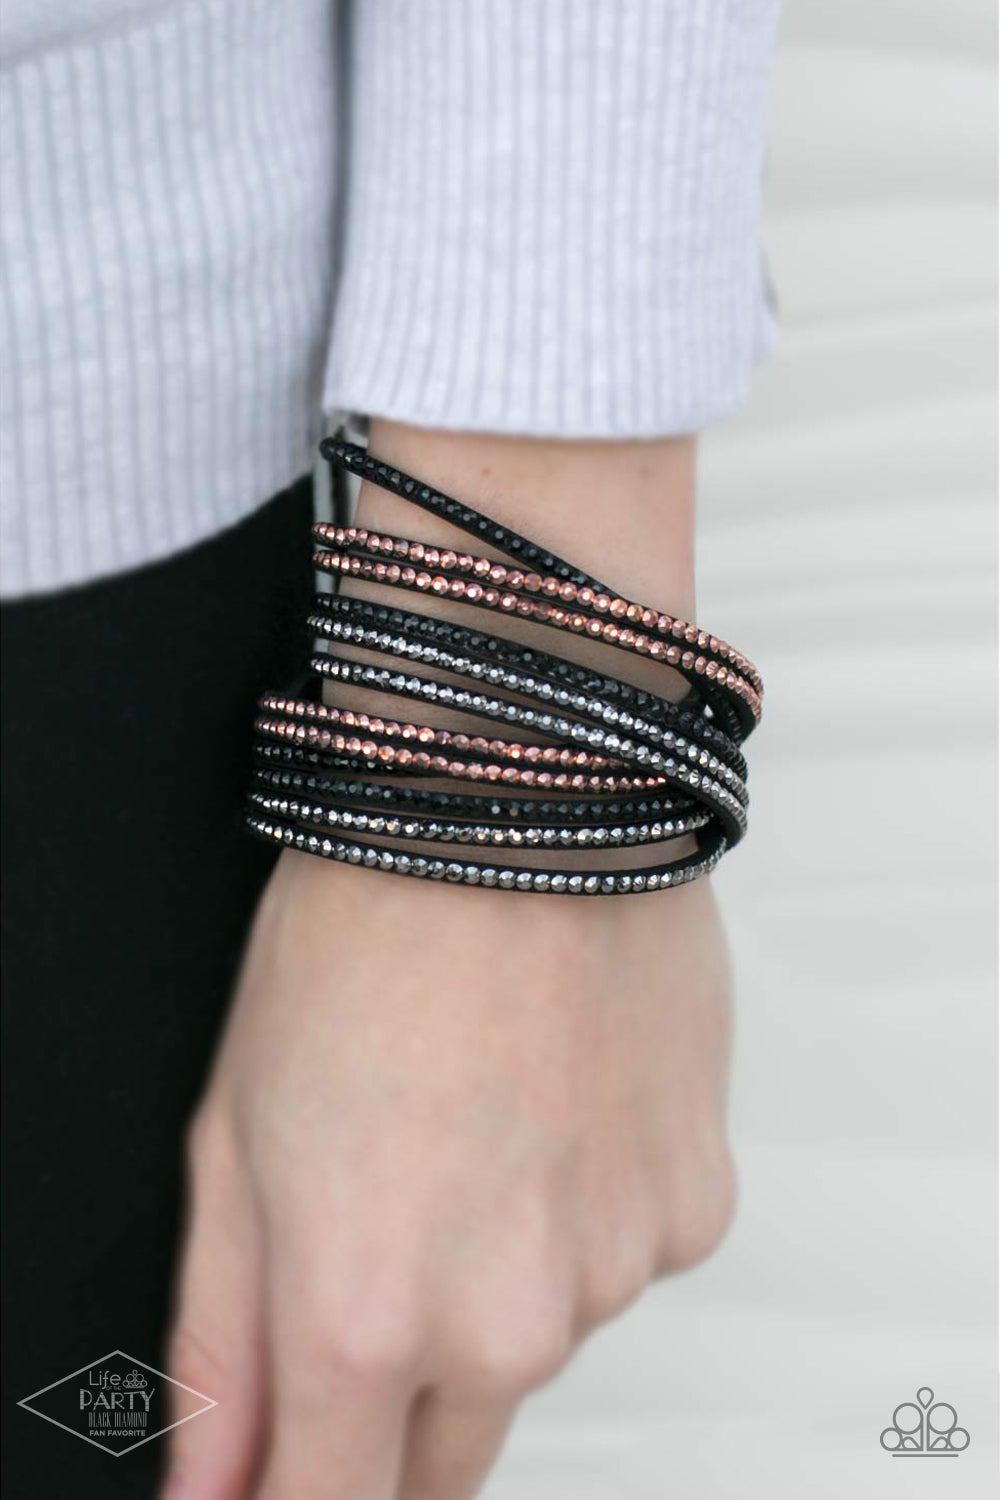 Black suede is spliced into six strands and embellished with rows of black, hematite, and metallic rhinestones brushed in a copper finish for a glitzy combination. The elongated leather band allow for a trendy double wrap design. Features an adjustable snap closure.  Sold as one individual bracelet. CAN BE WORN AS A CHOKER NECKLACE AS WELL!